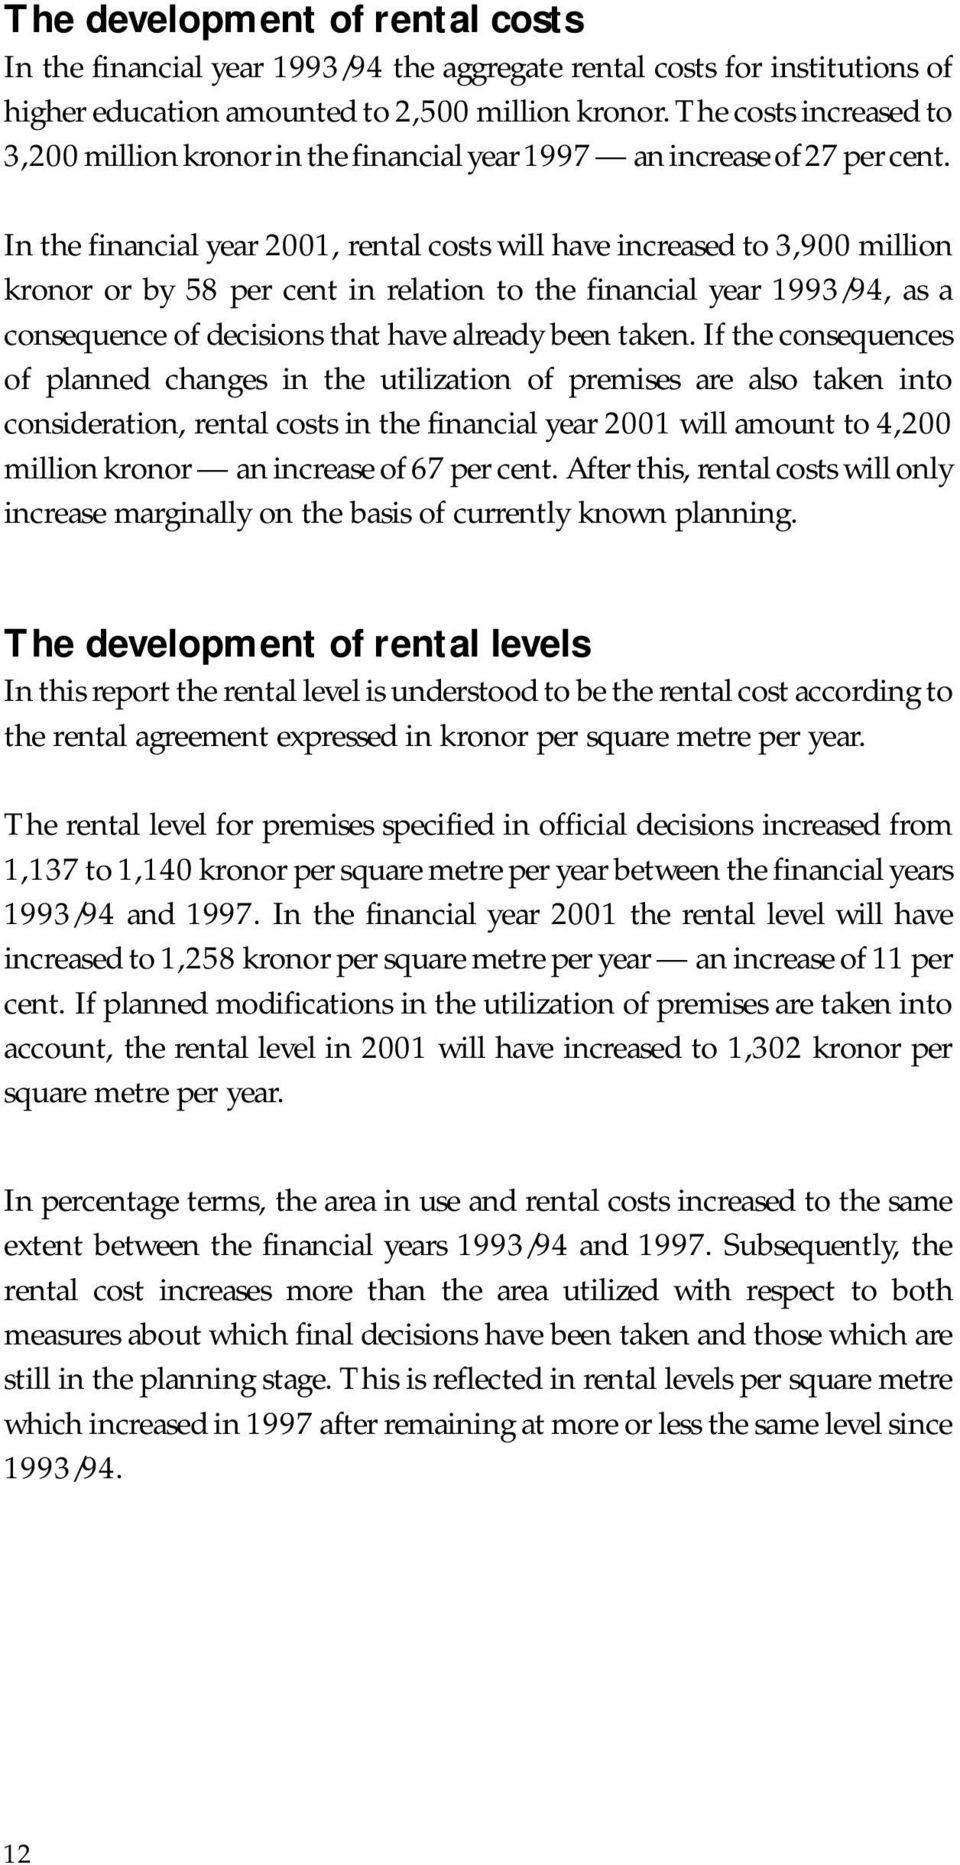 In the financial year 2001, rental costs will have increased to 3,900 million kronor or by 58 per cent in relation to the financial year 1993/94, as a consequence of decisions that have already been